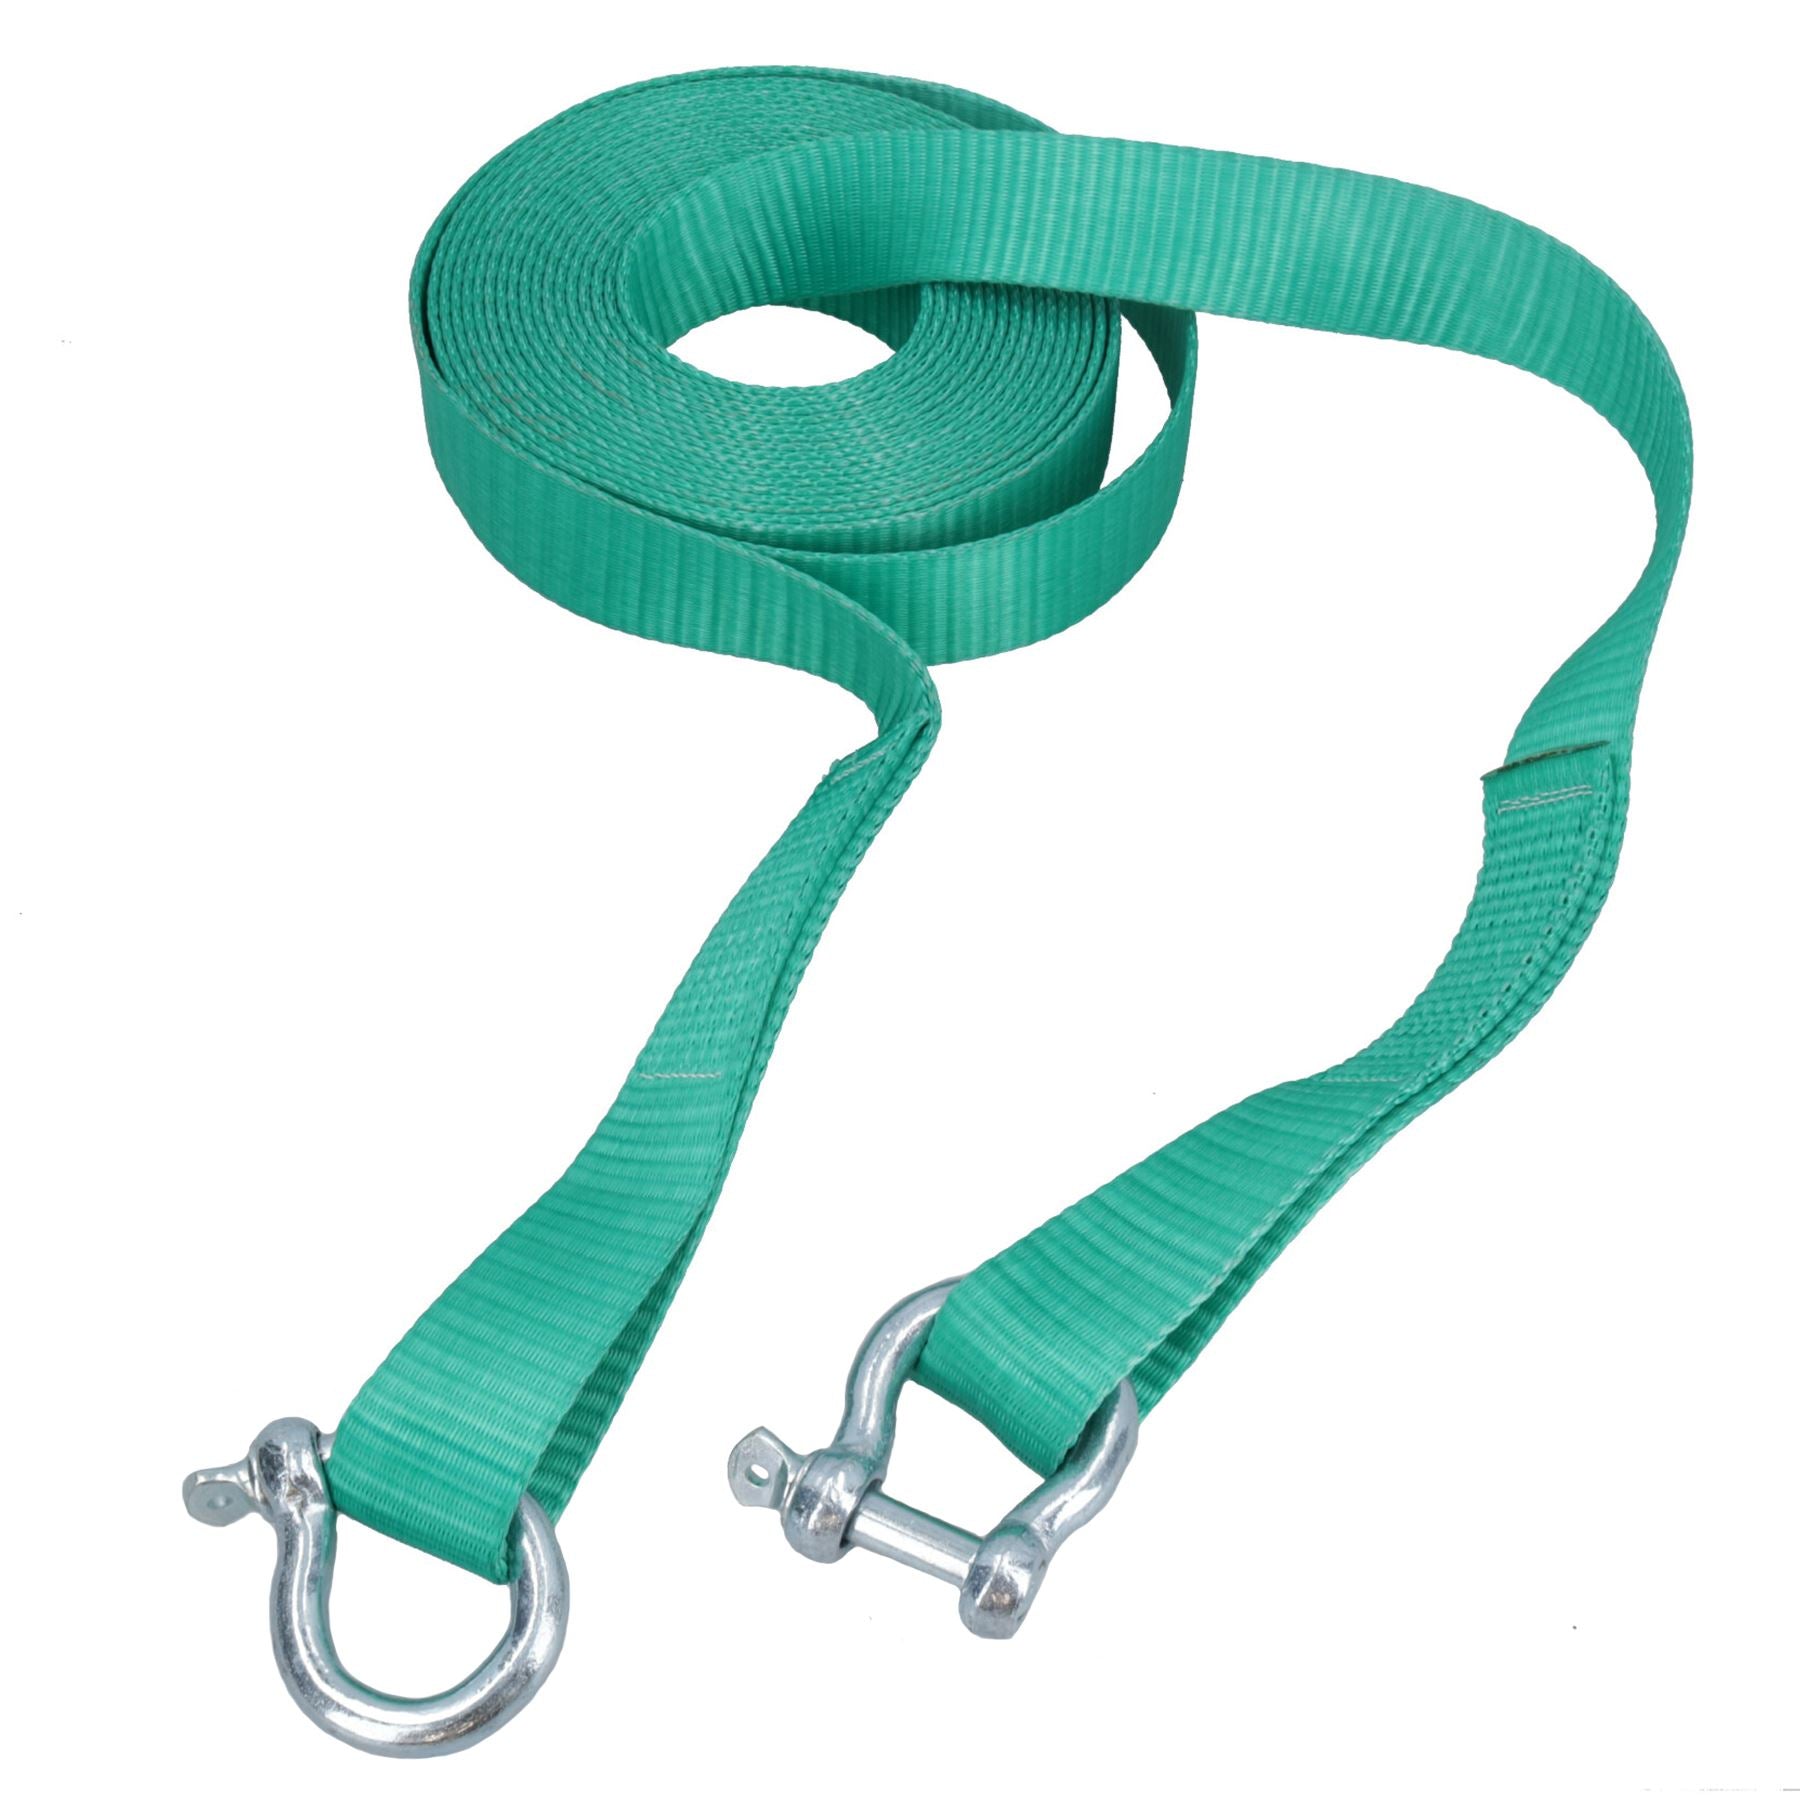 Anchor Stern Tie Shore Sling 20m Rock Strap & Two Shackles 8000kg Capacity